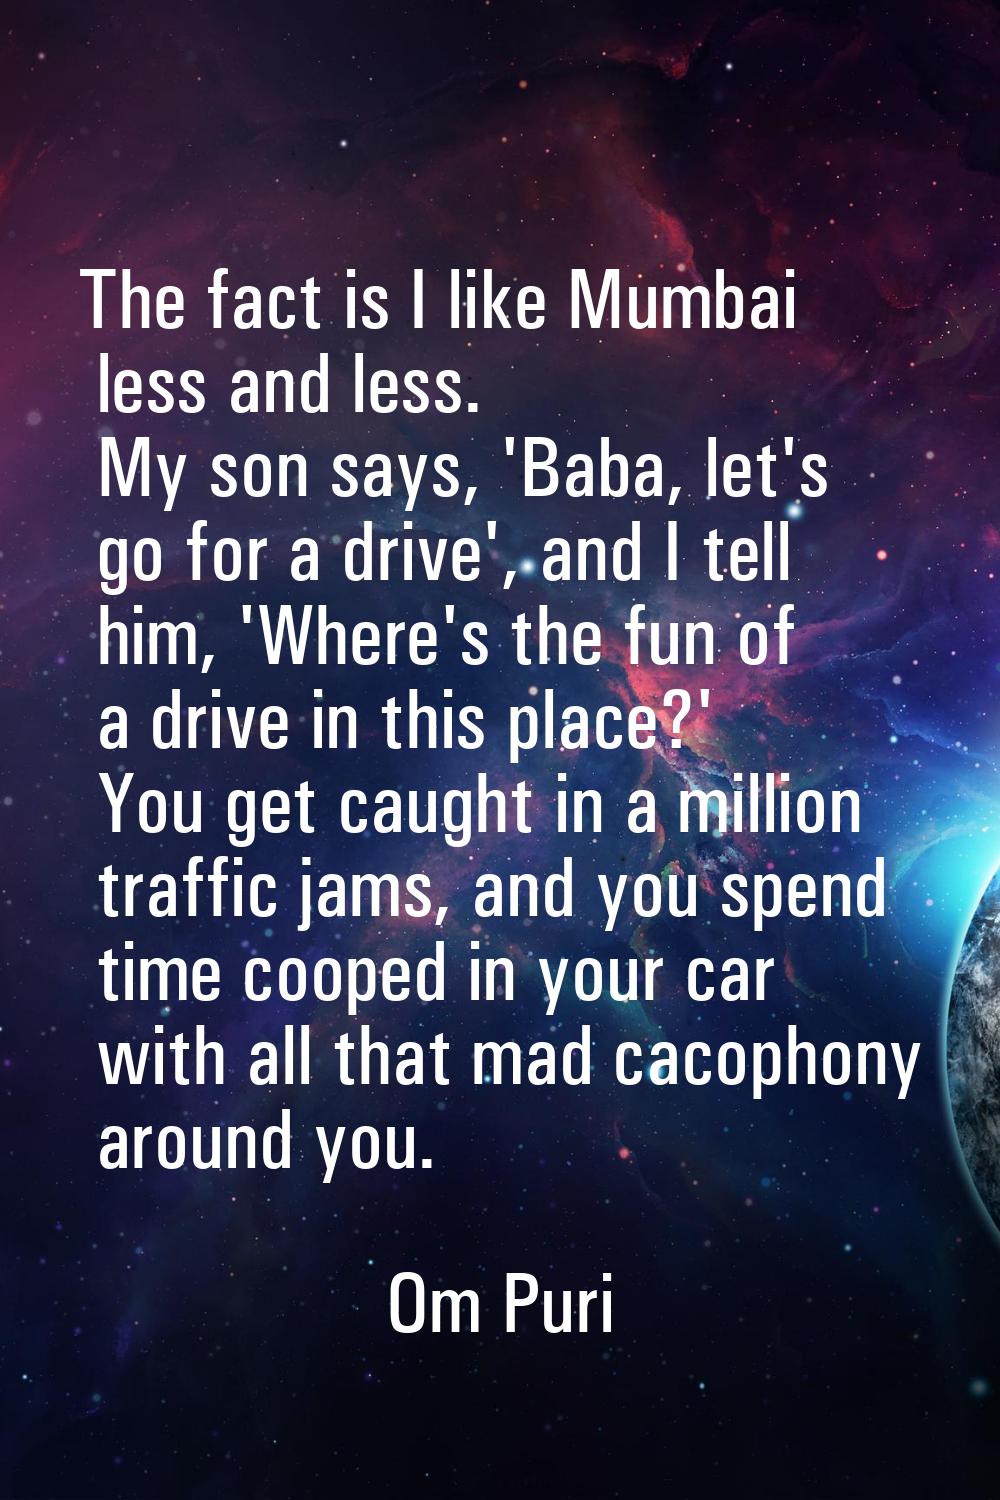 The fact is I like Mumbai less and less. My son says, 'Baba, let's go for a drive', and I tell him,